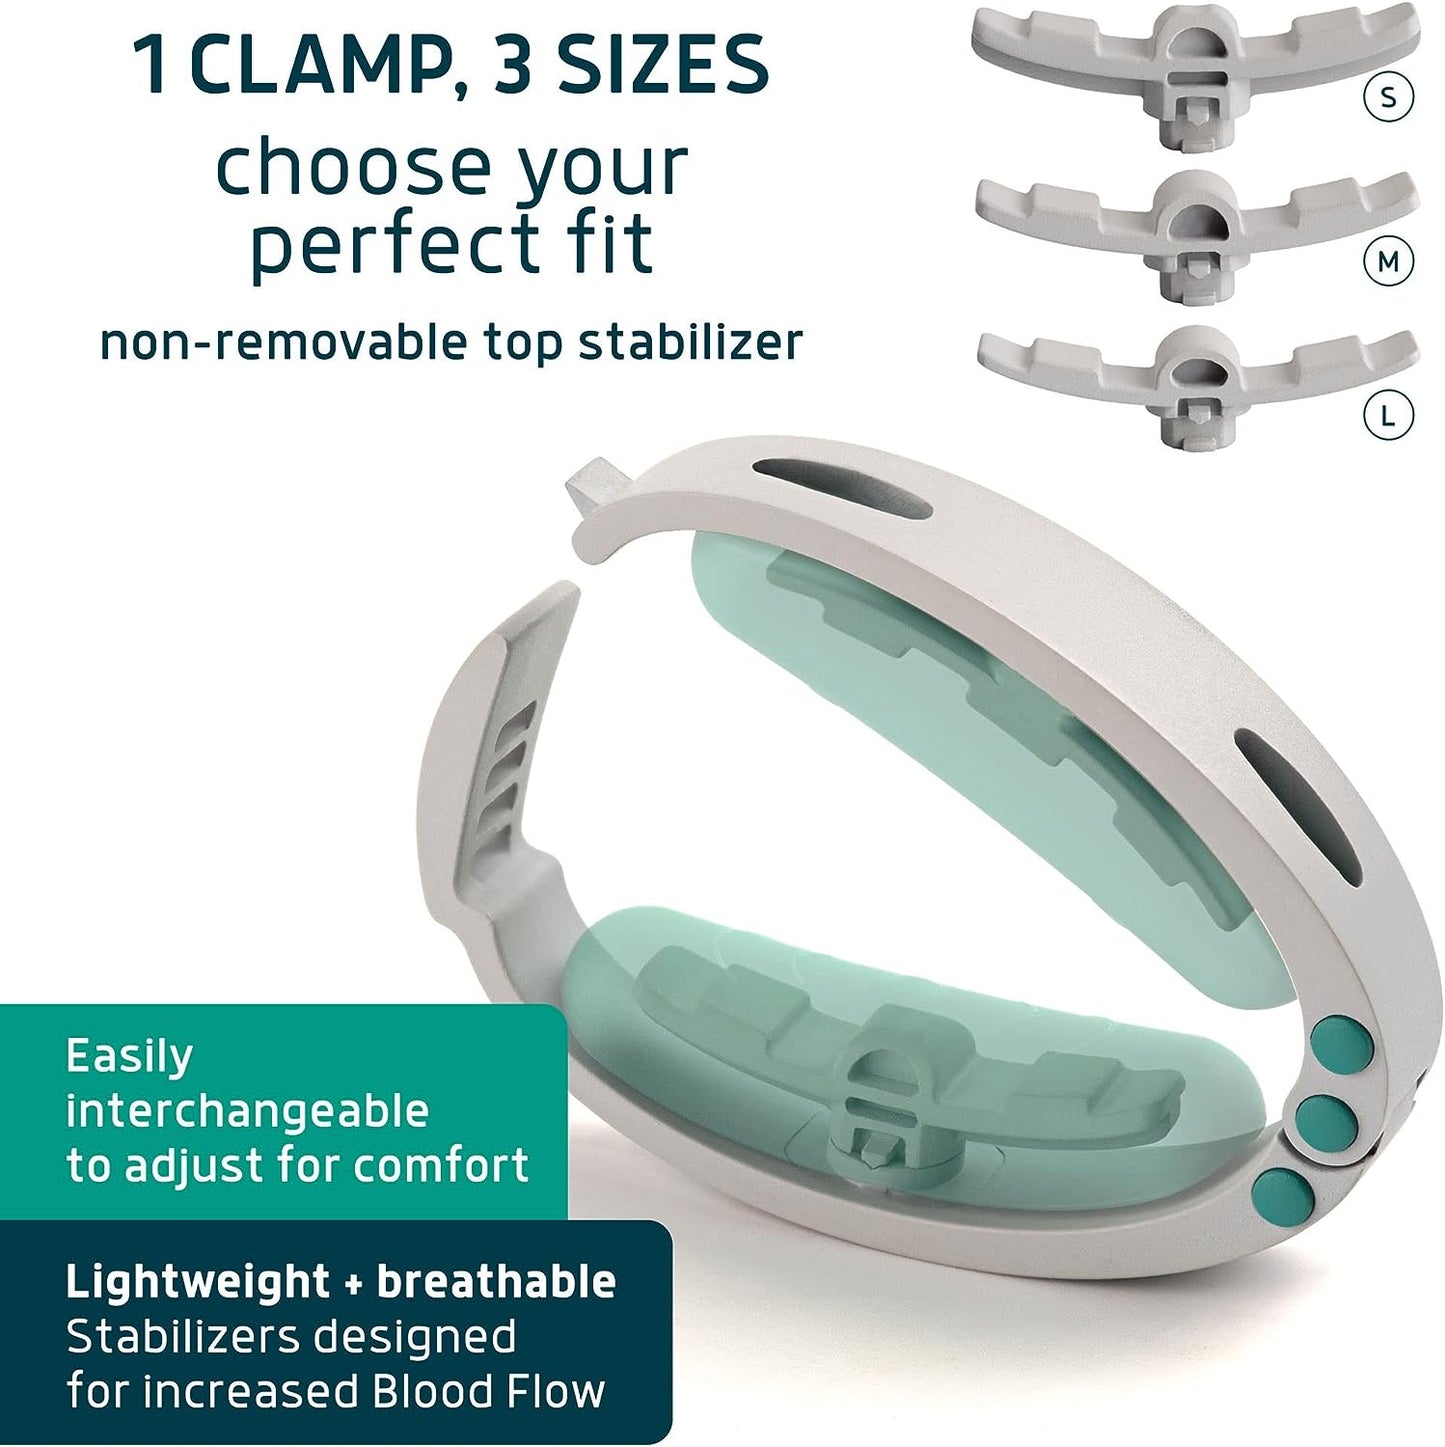 Confidence Clamp by Lunderg - Comfortable Urinary Incontinence Clamp with 3 Adjustable Sizes & Travel Bag - Recommended by Doctors & Money Back Guarantee